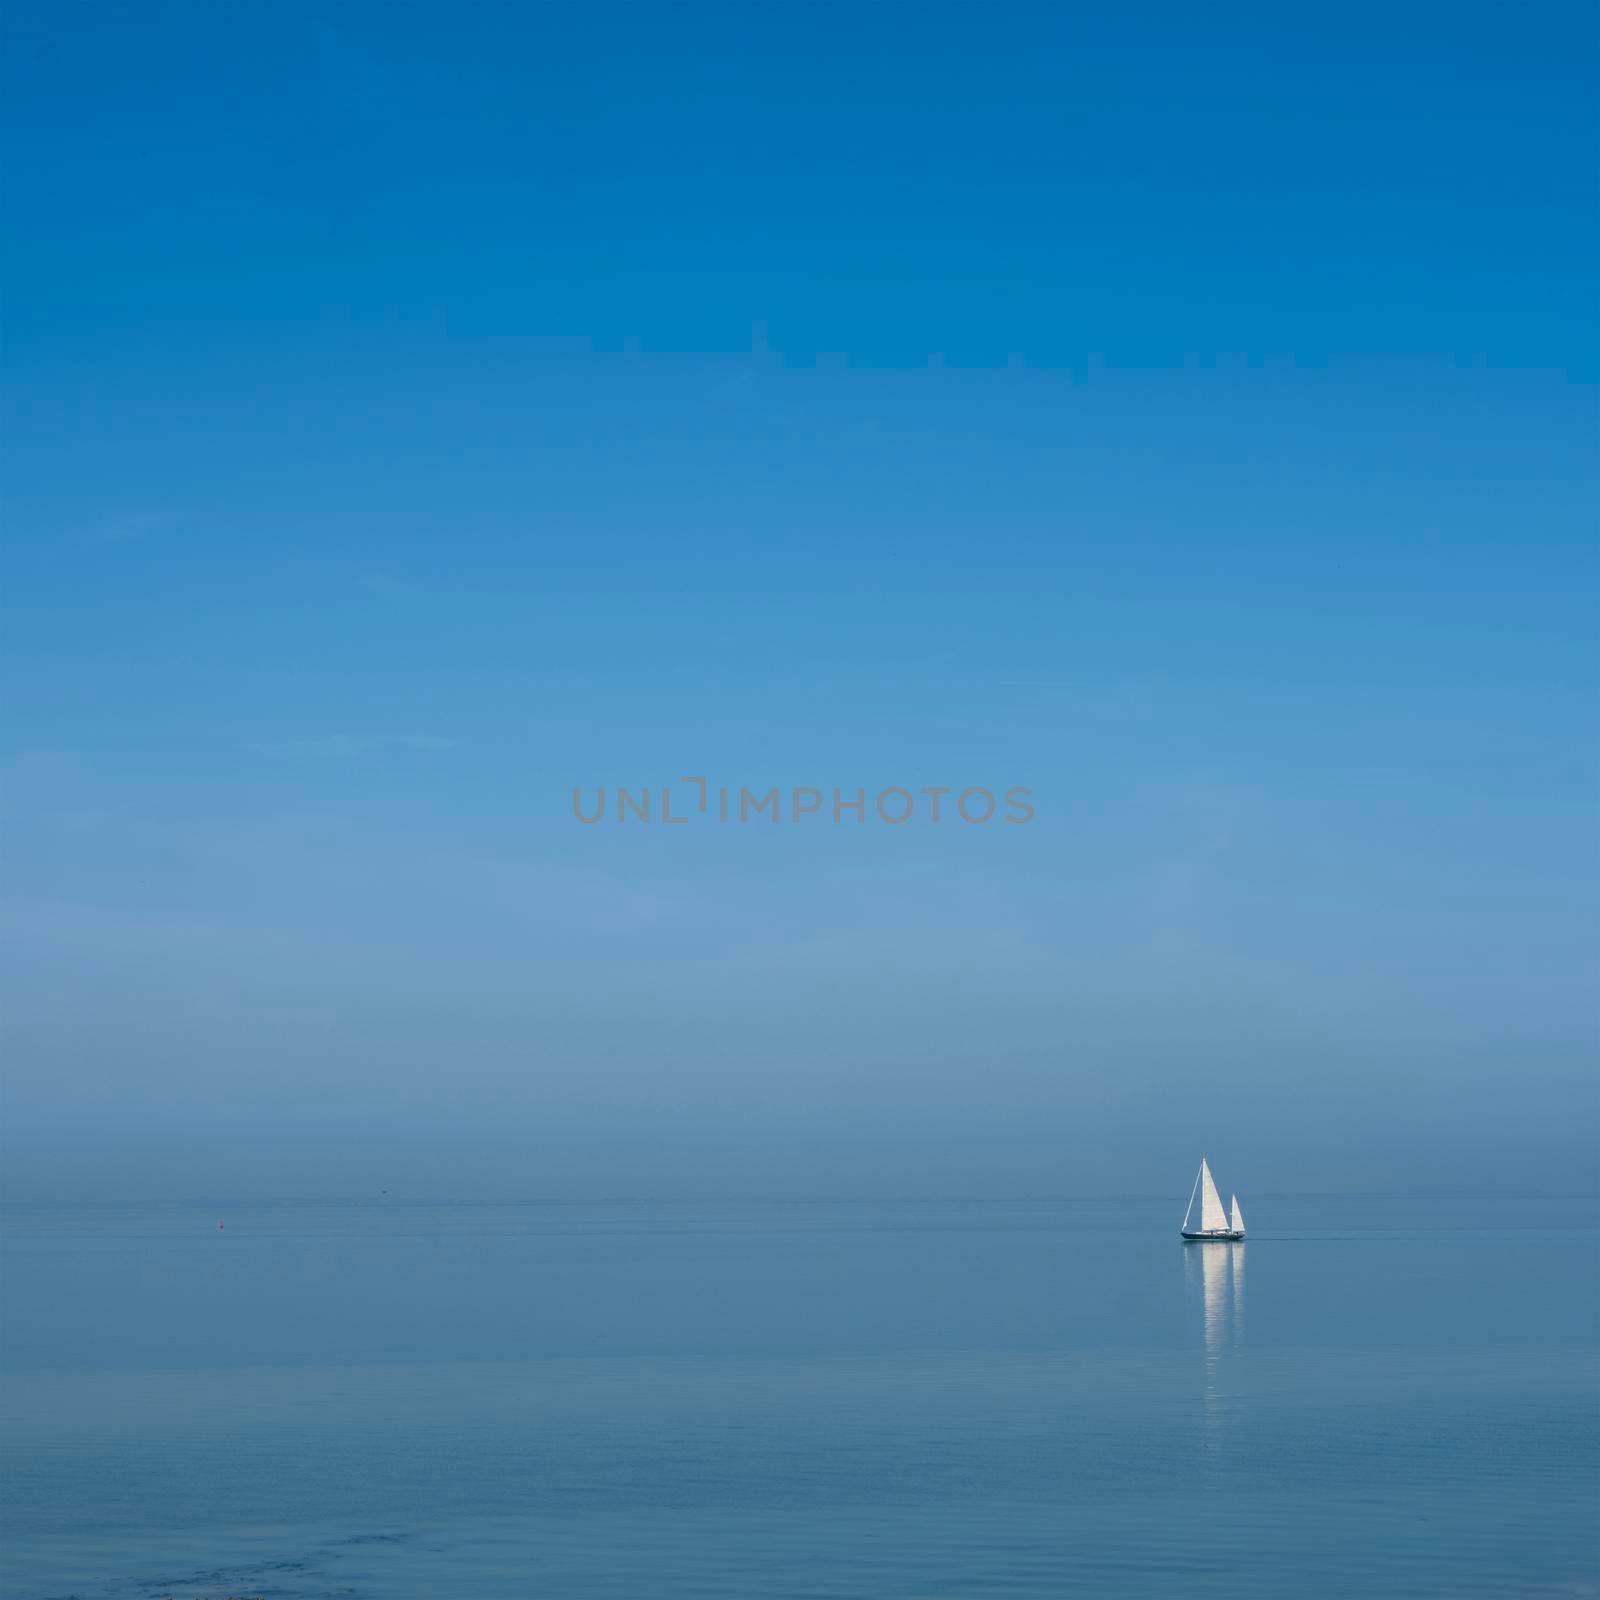 lonely sailing vessel on blue water of vast empty lake under blue sky in dutch province of zeeland in the netherlands